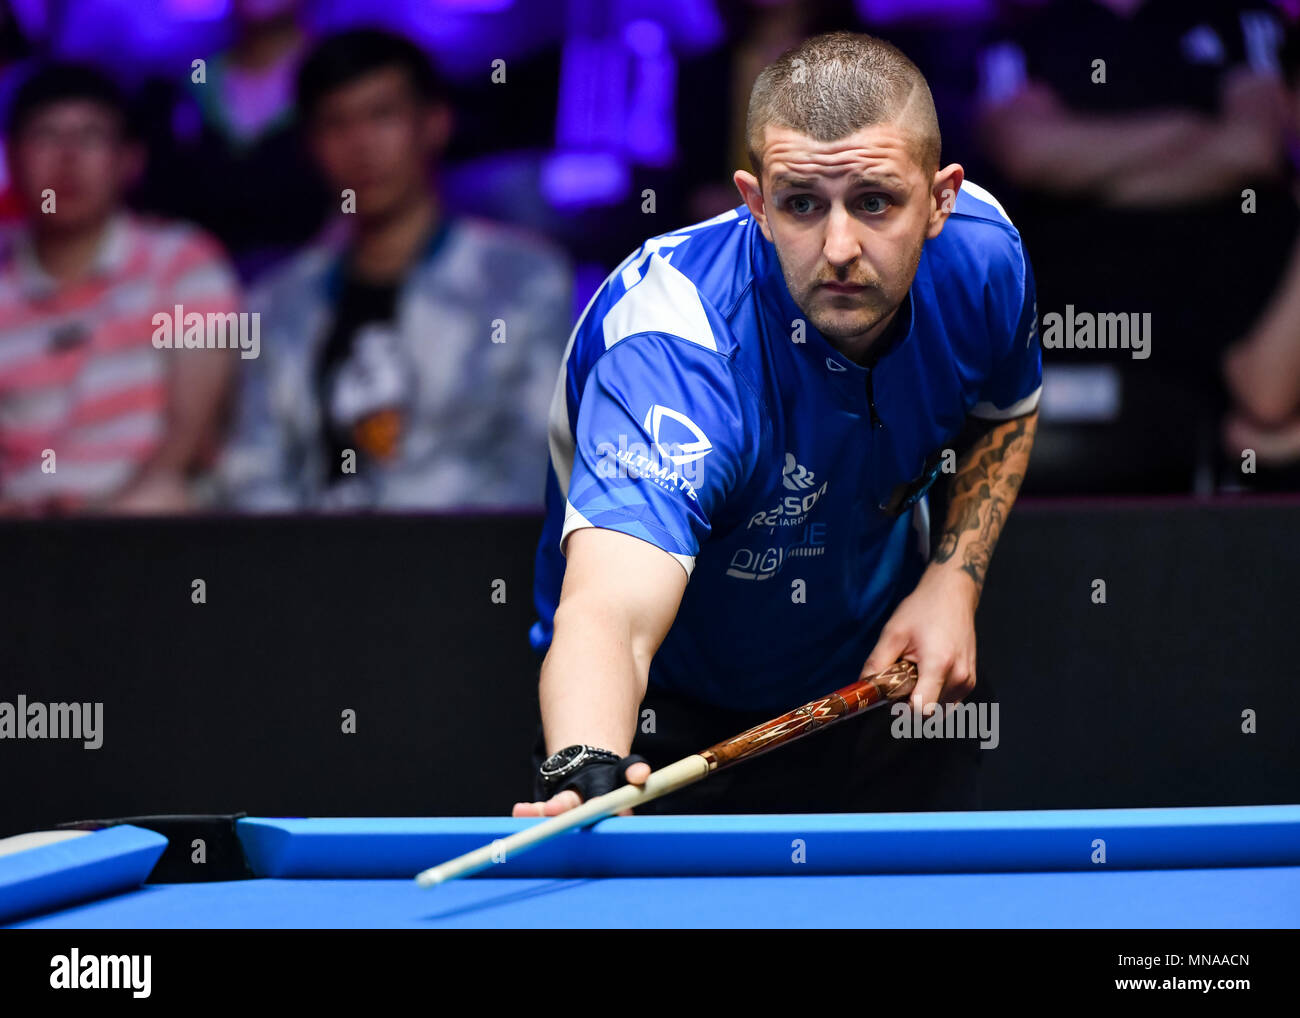 Shanghai, China. 15th May 2018. Scotland's Jayson Shaw in action during WORLD CUP of POOL 2018: Round 1 - Scotland vs Canada at Luwan (Gymnasium) Arena on Tuesday, 15 May 2018. SHANGHAI, CHINA. Credit: Taka G Wu Credit: Taka Wu/Alamy Live News Stock Photo